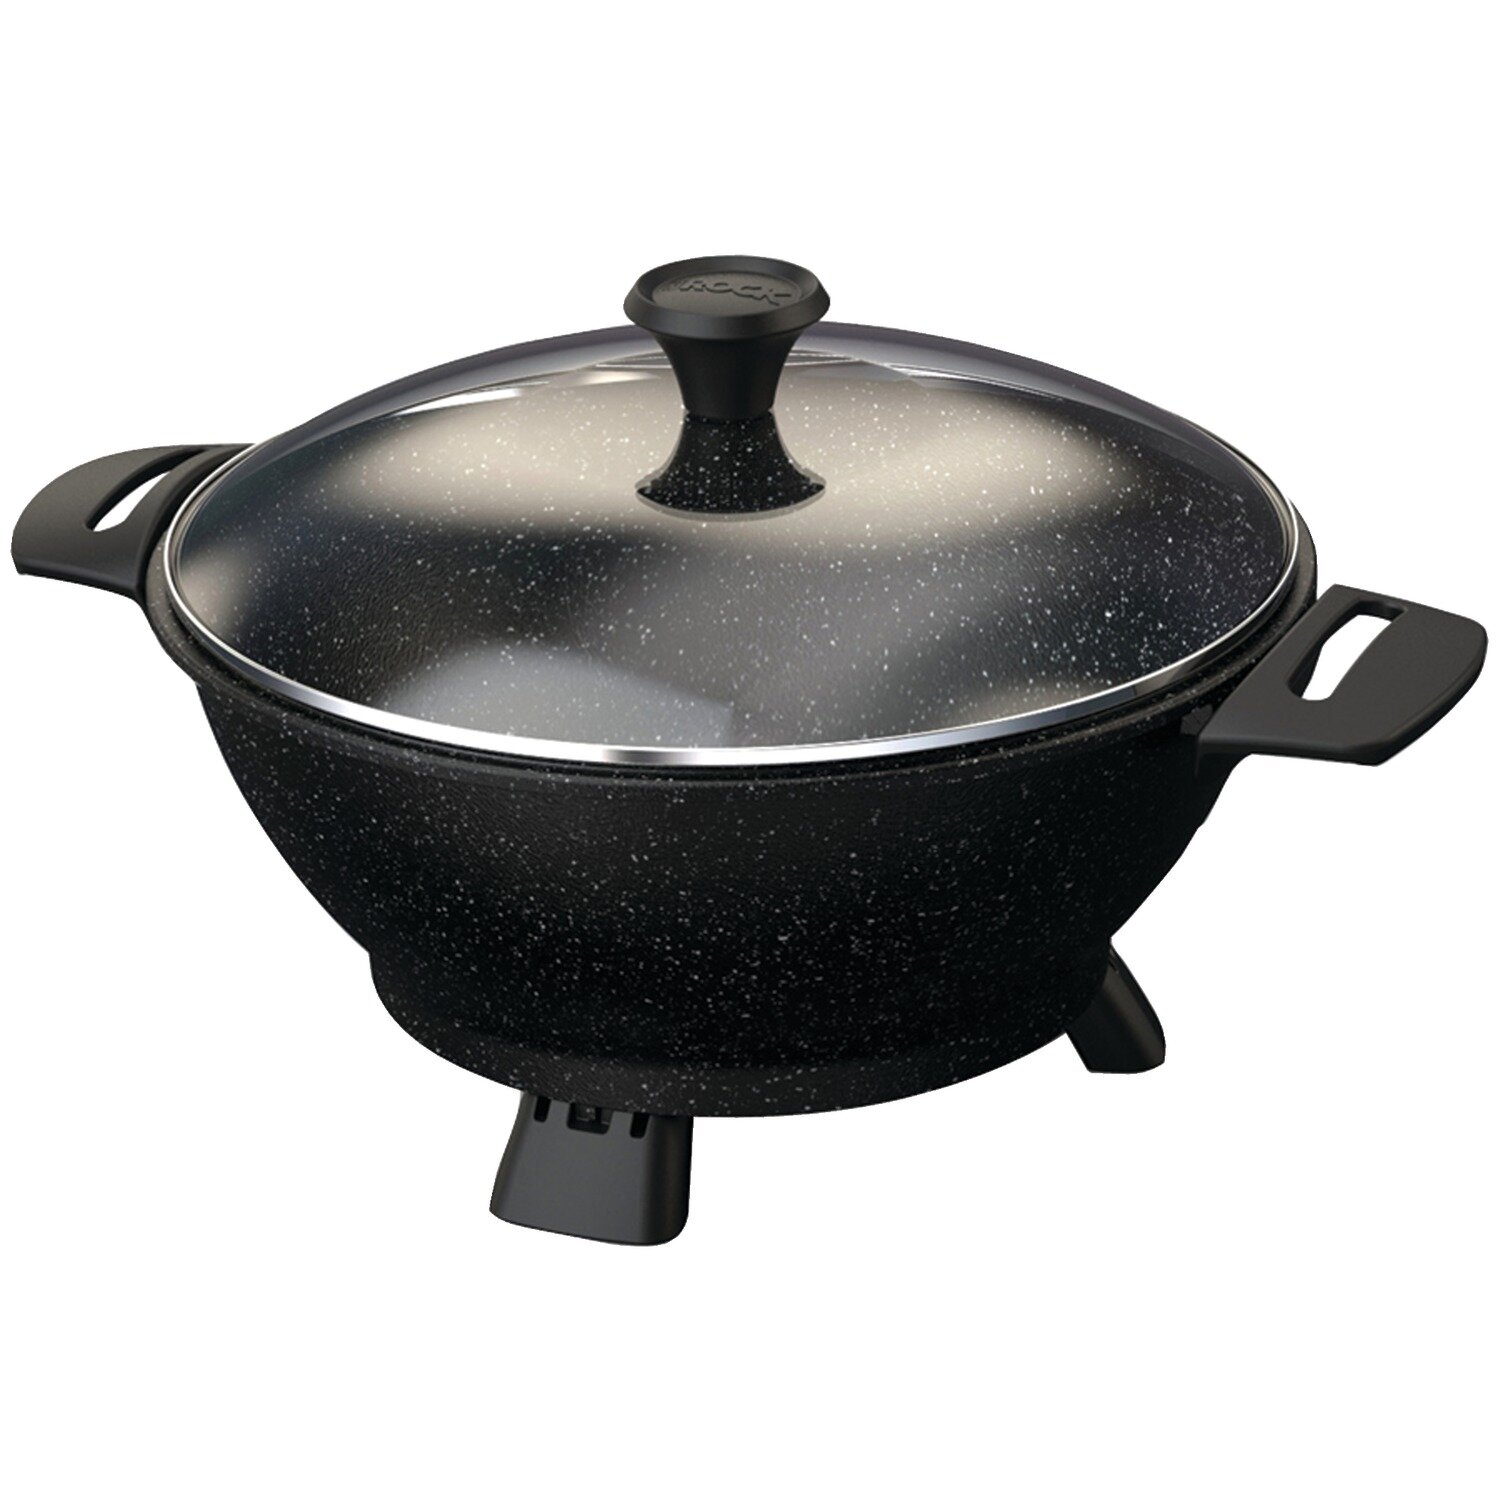 DASH 14 Family Size Nonstick Rapid Skillet with Tempere 